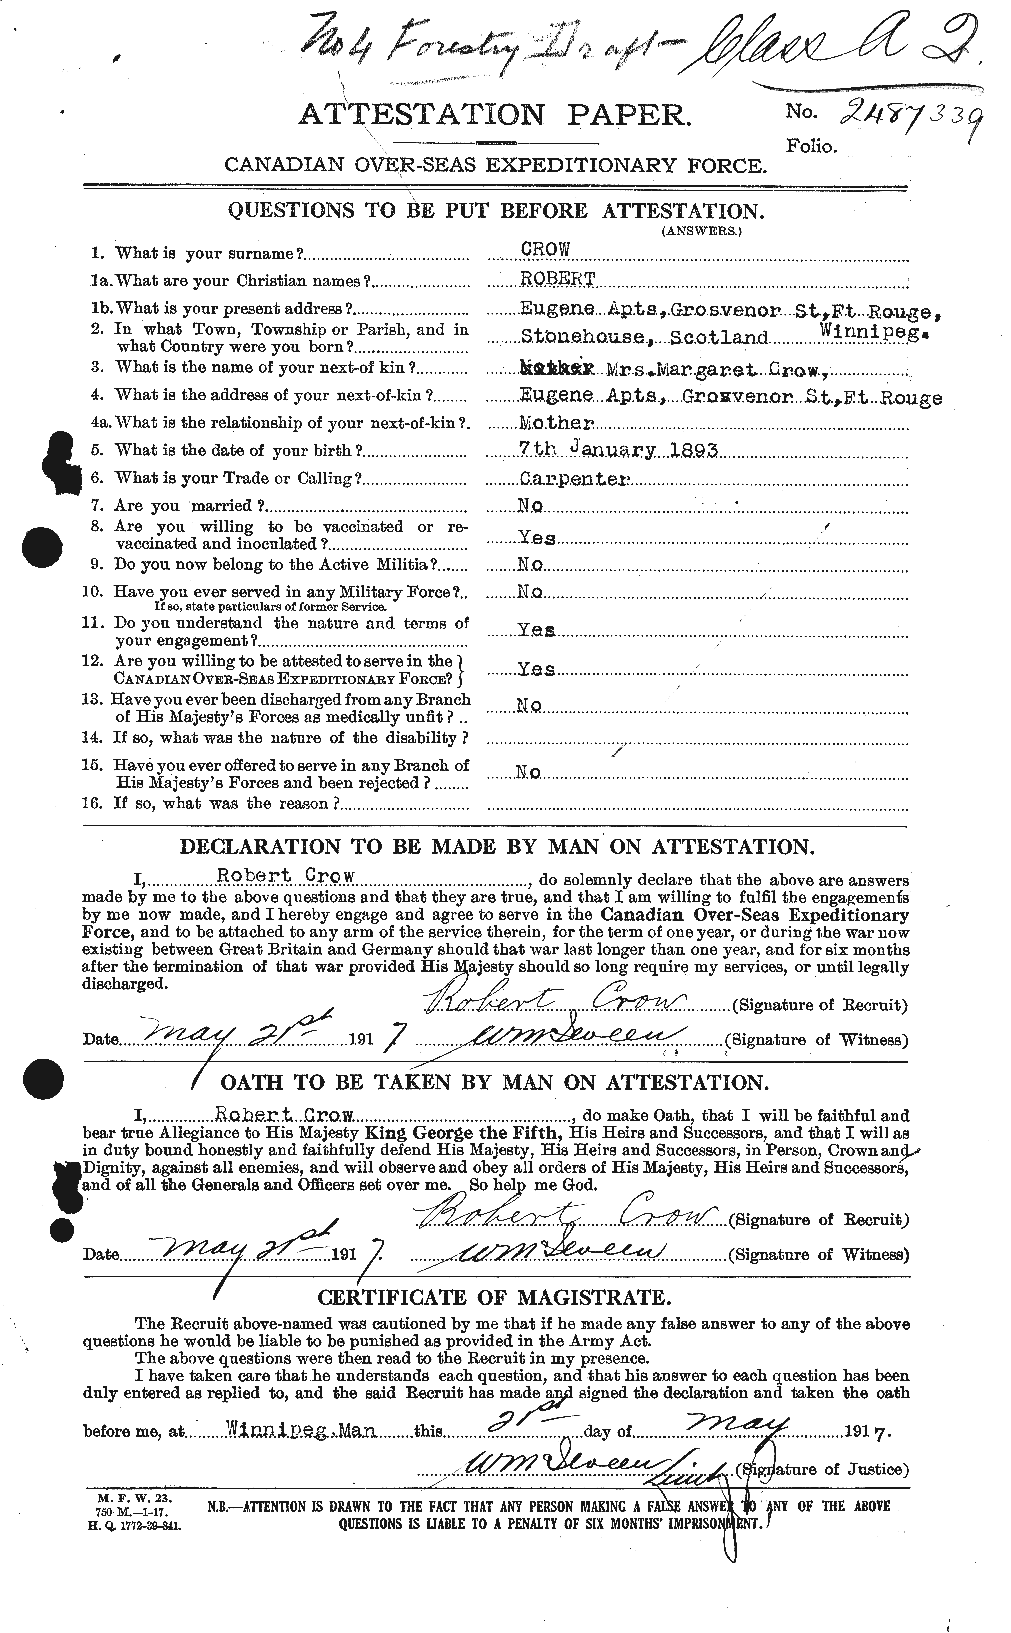 Personnel Records of the First World War - CEF 065535a